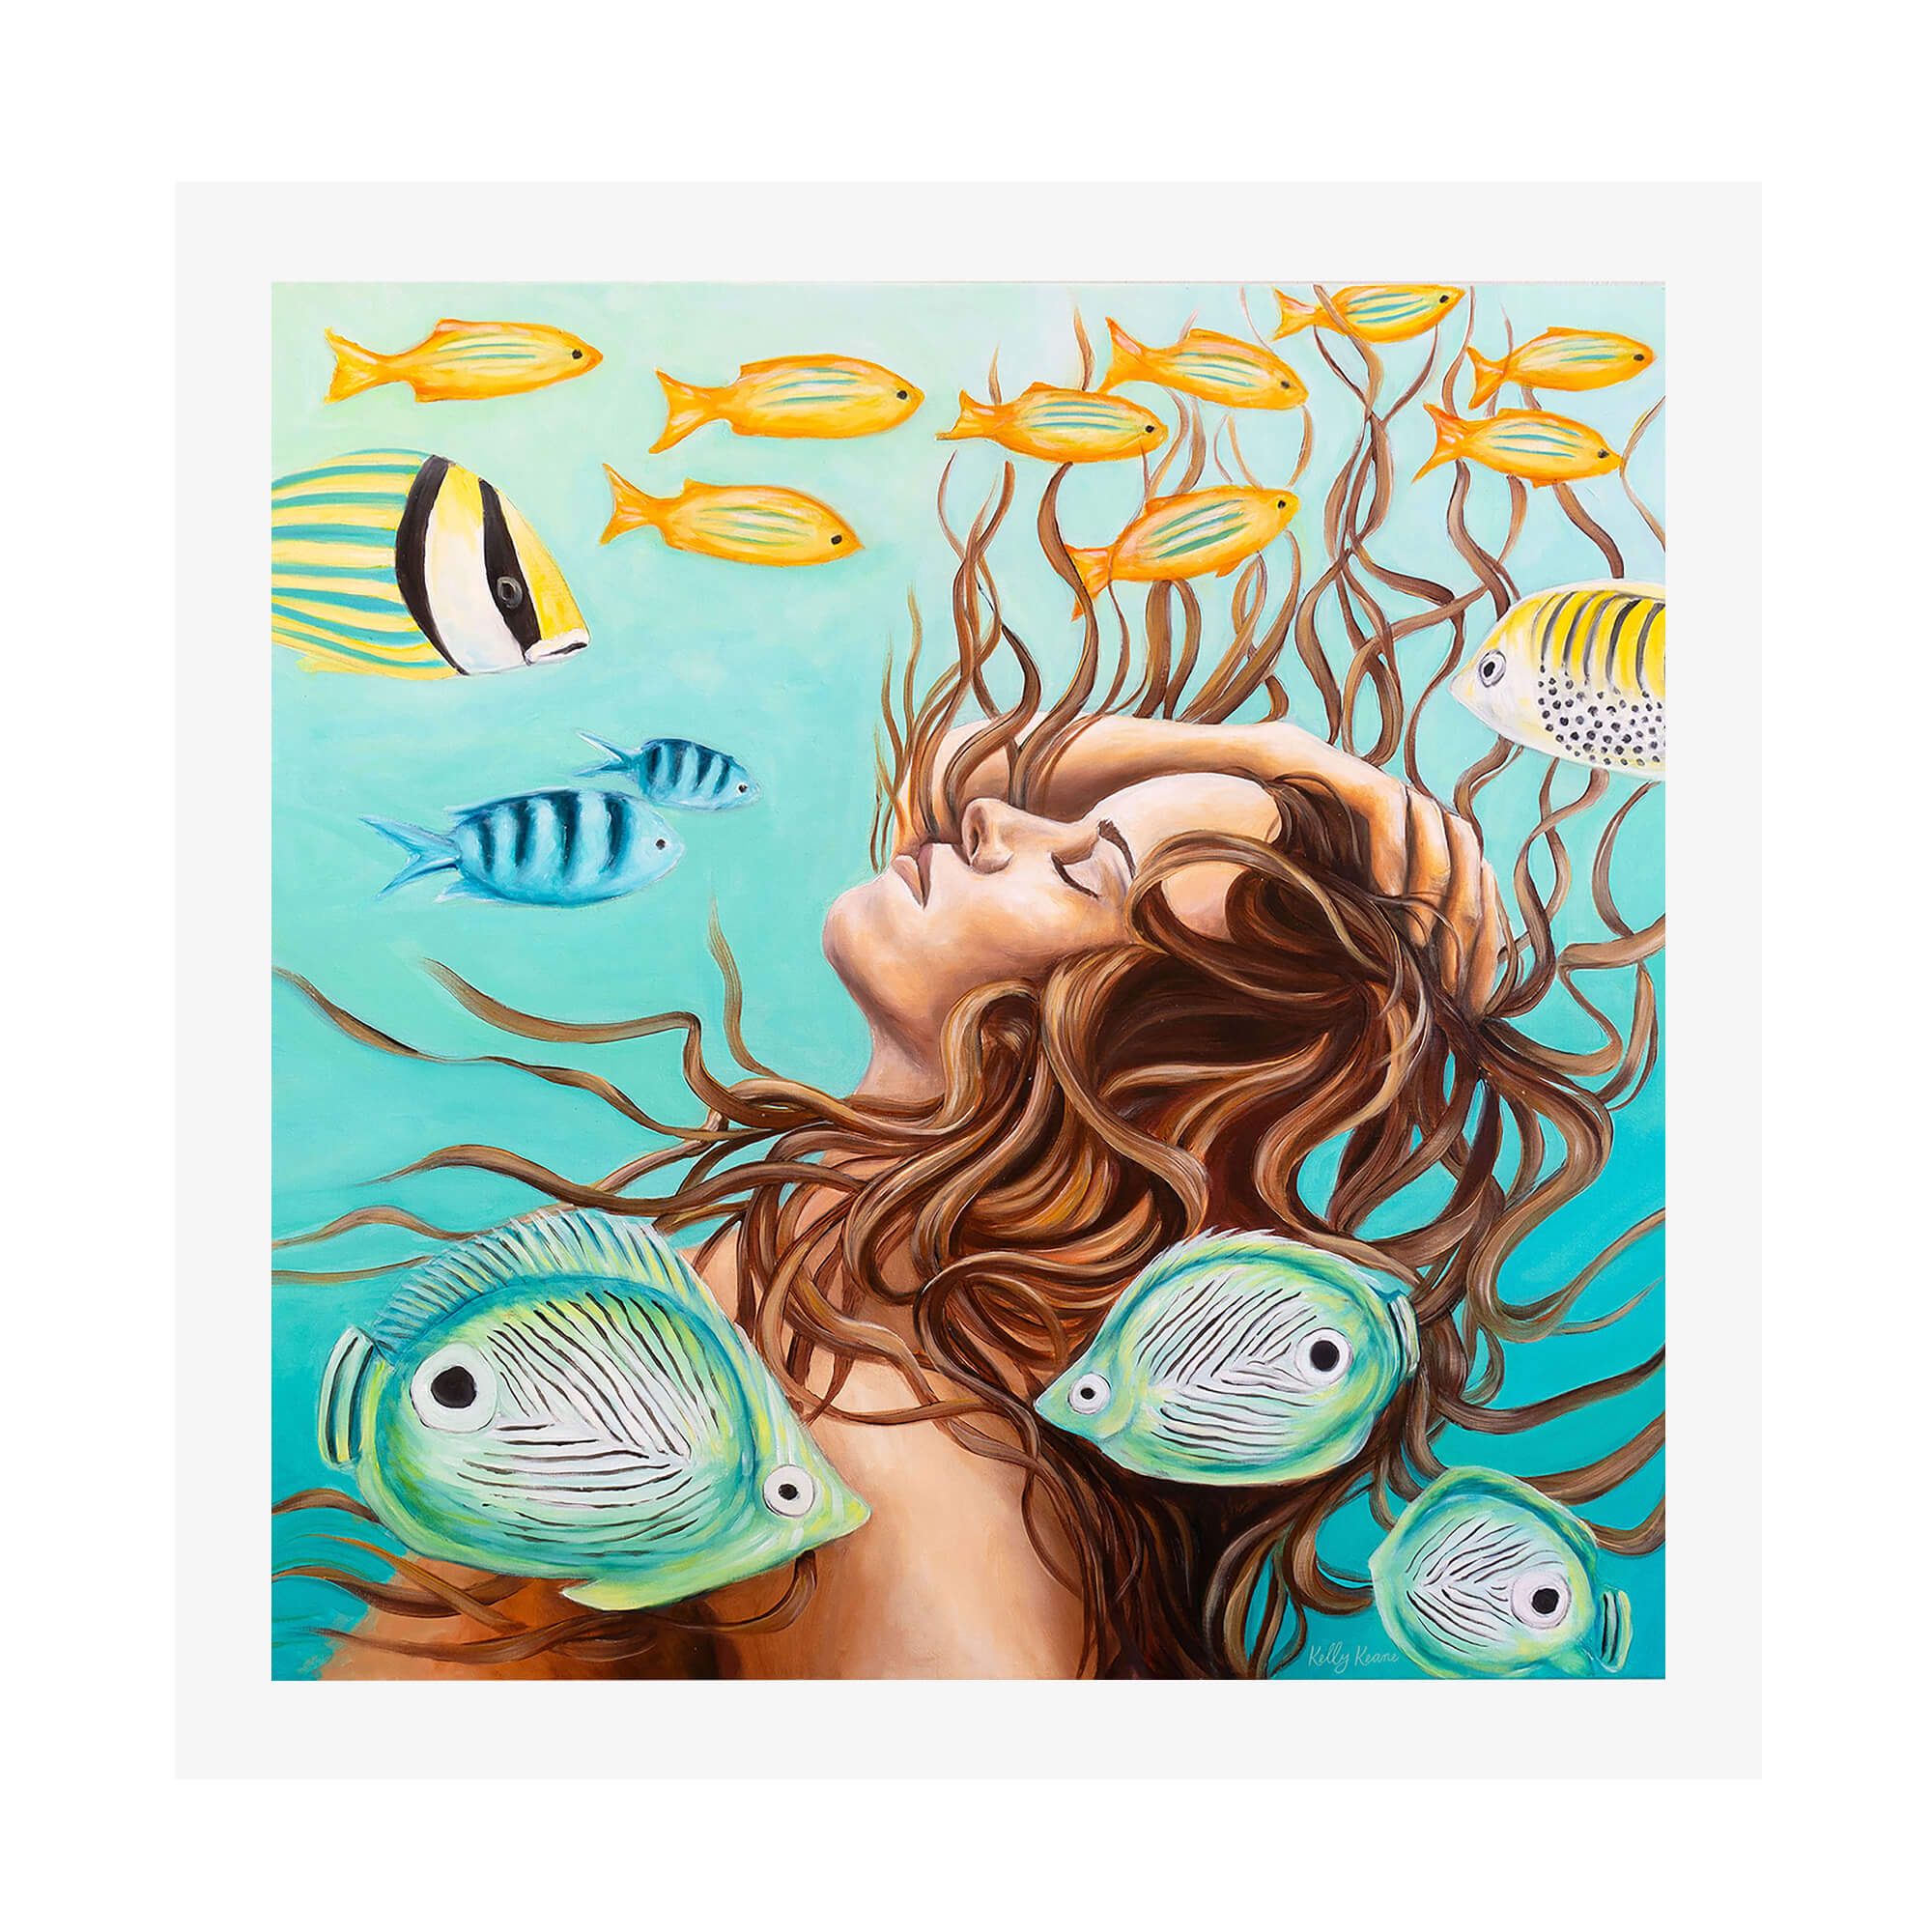 Paper art print featuring some colorful tropical fish by Hawaii artist Kelly Keane